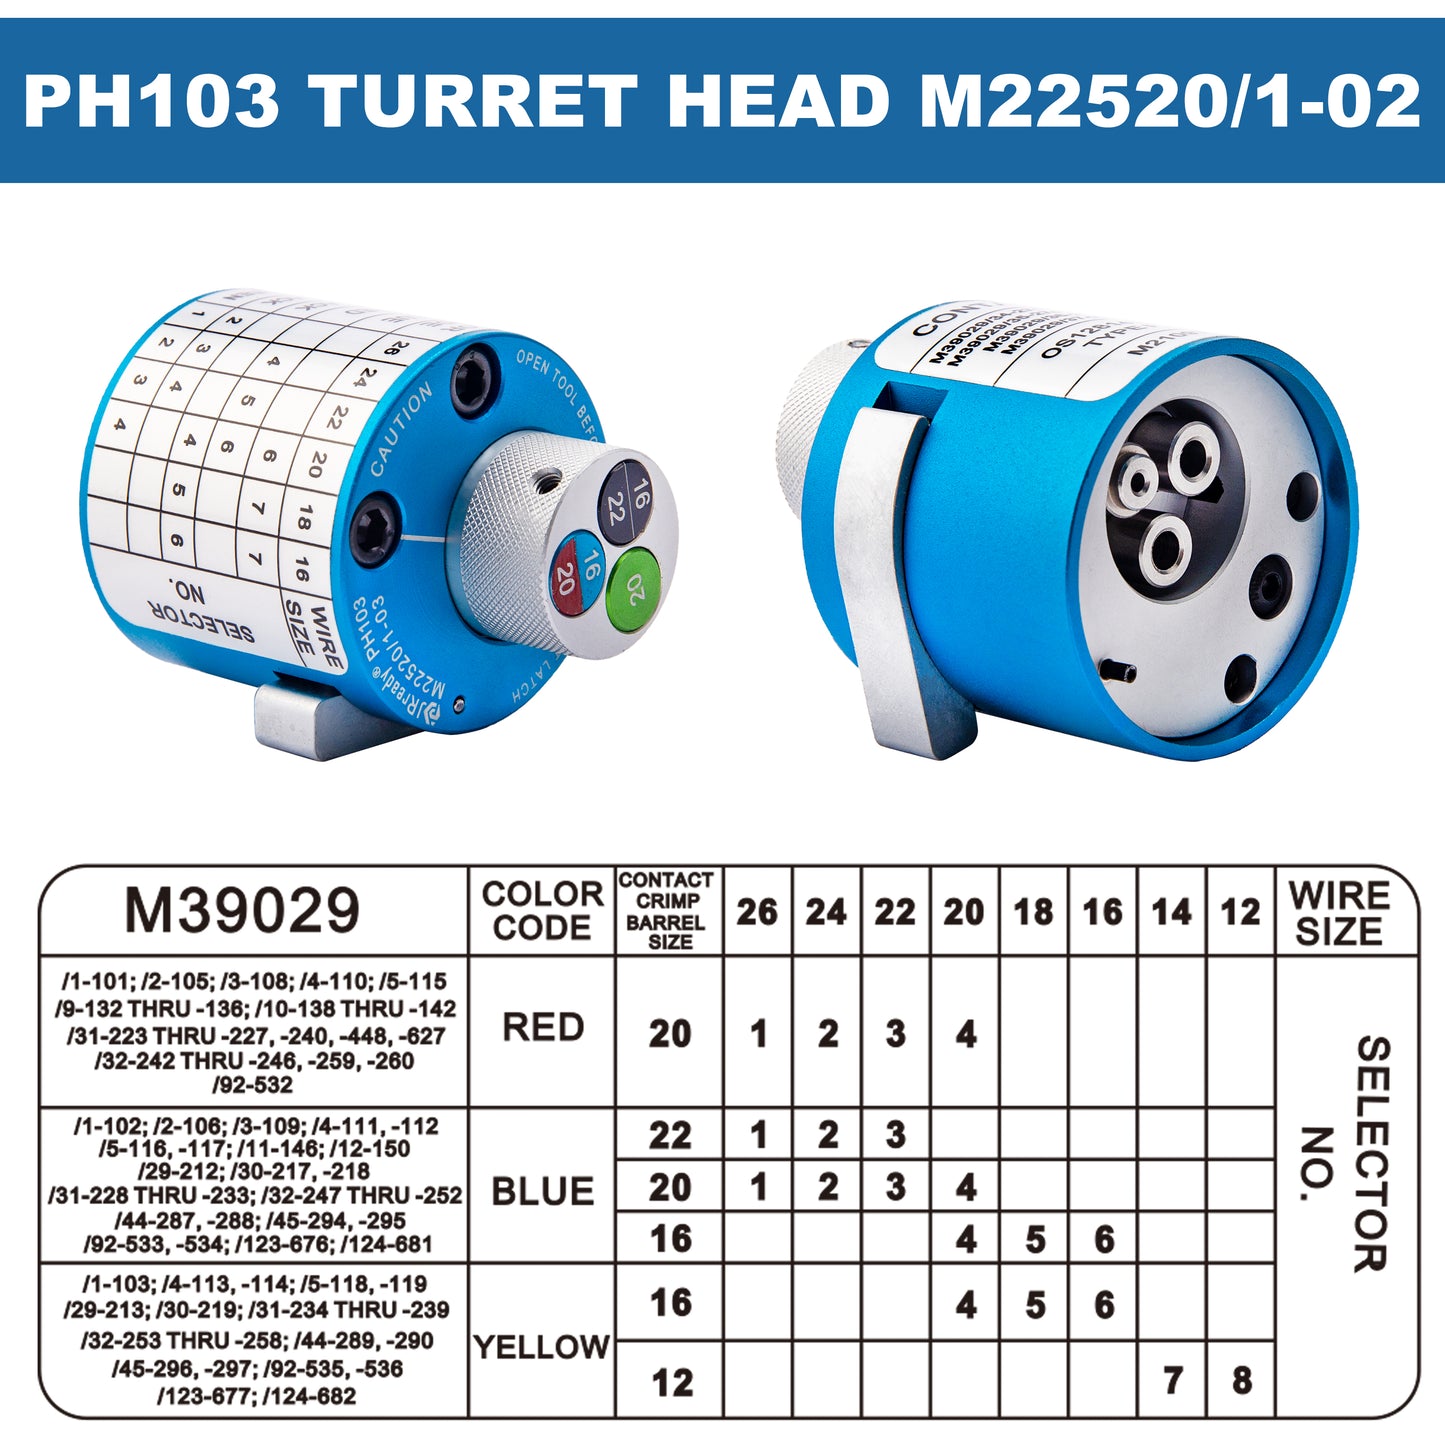 JRready PH103 (M22520/1-03)Turret Head Positoner, Match M22520/1-01 for MIL-DTL-28748 Connector M39029,MS17808 series Contacts